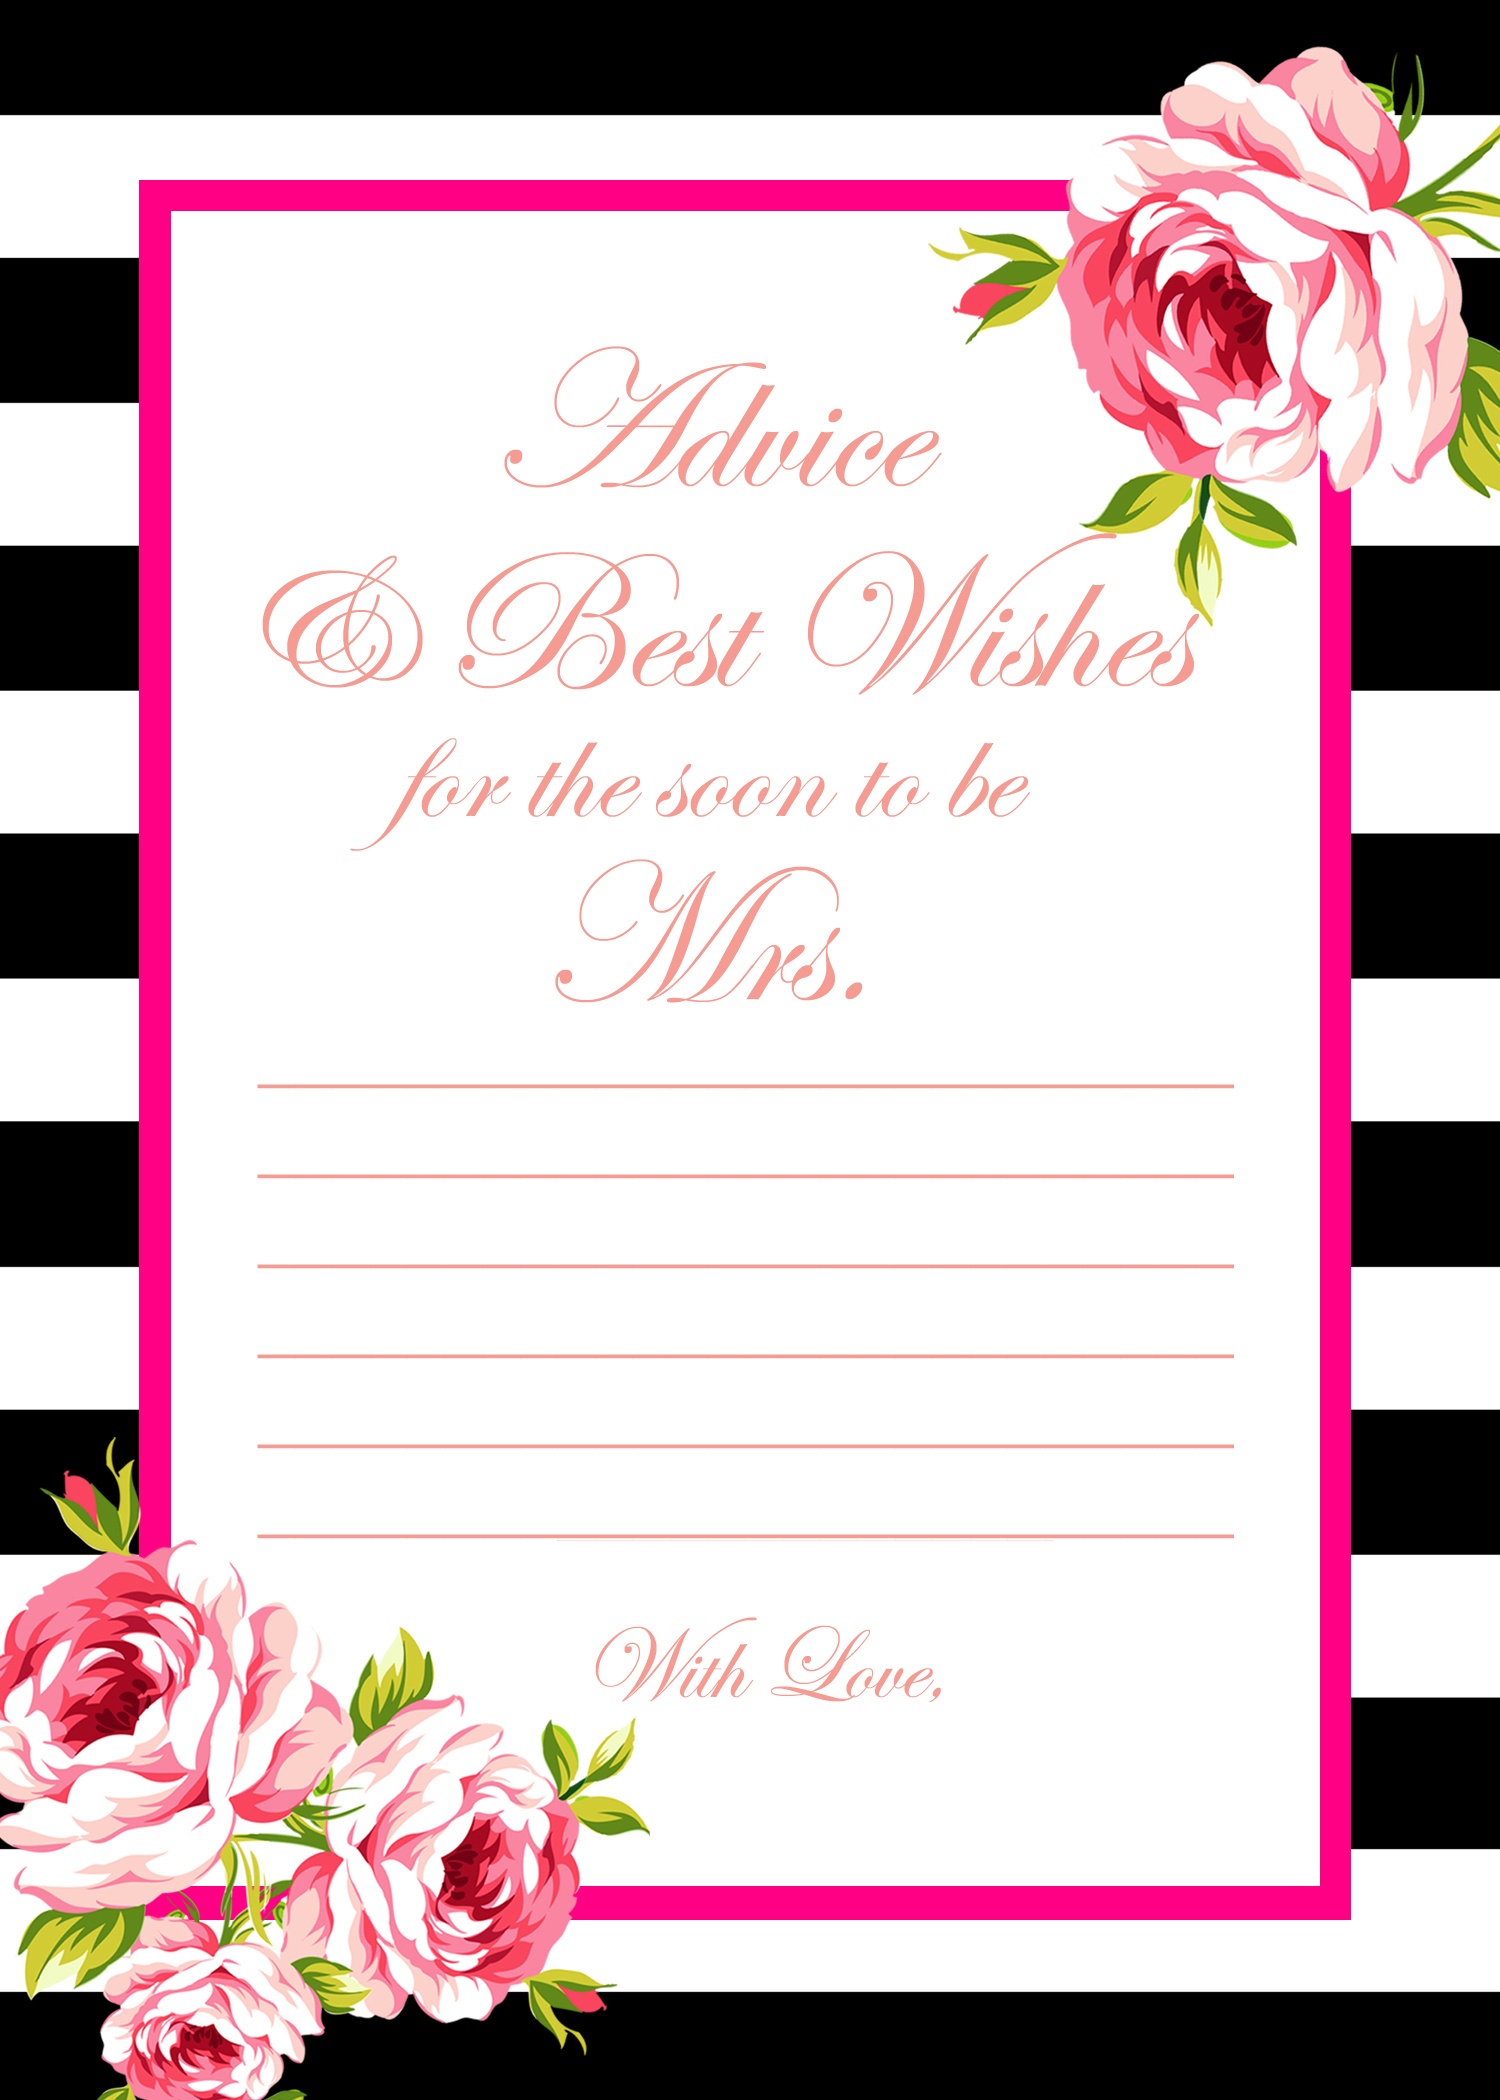 2_Free_Printable_Games Archives - Bridal Shower Ideas - Themes - How Well Do You Know The Bride Free Printable